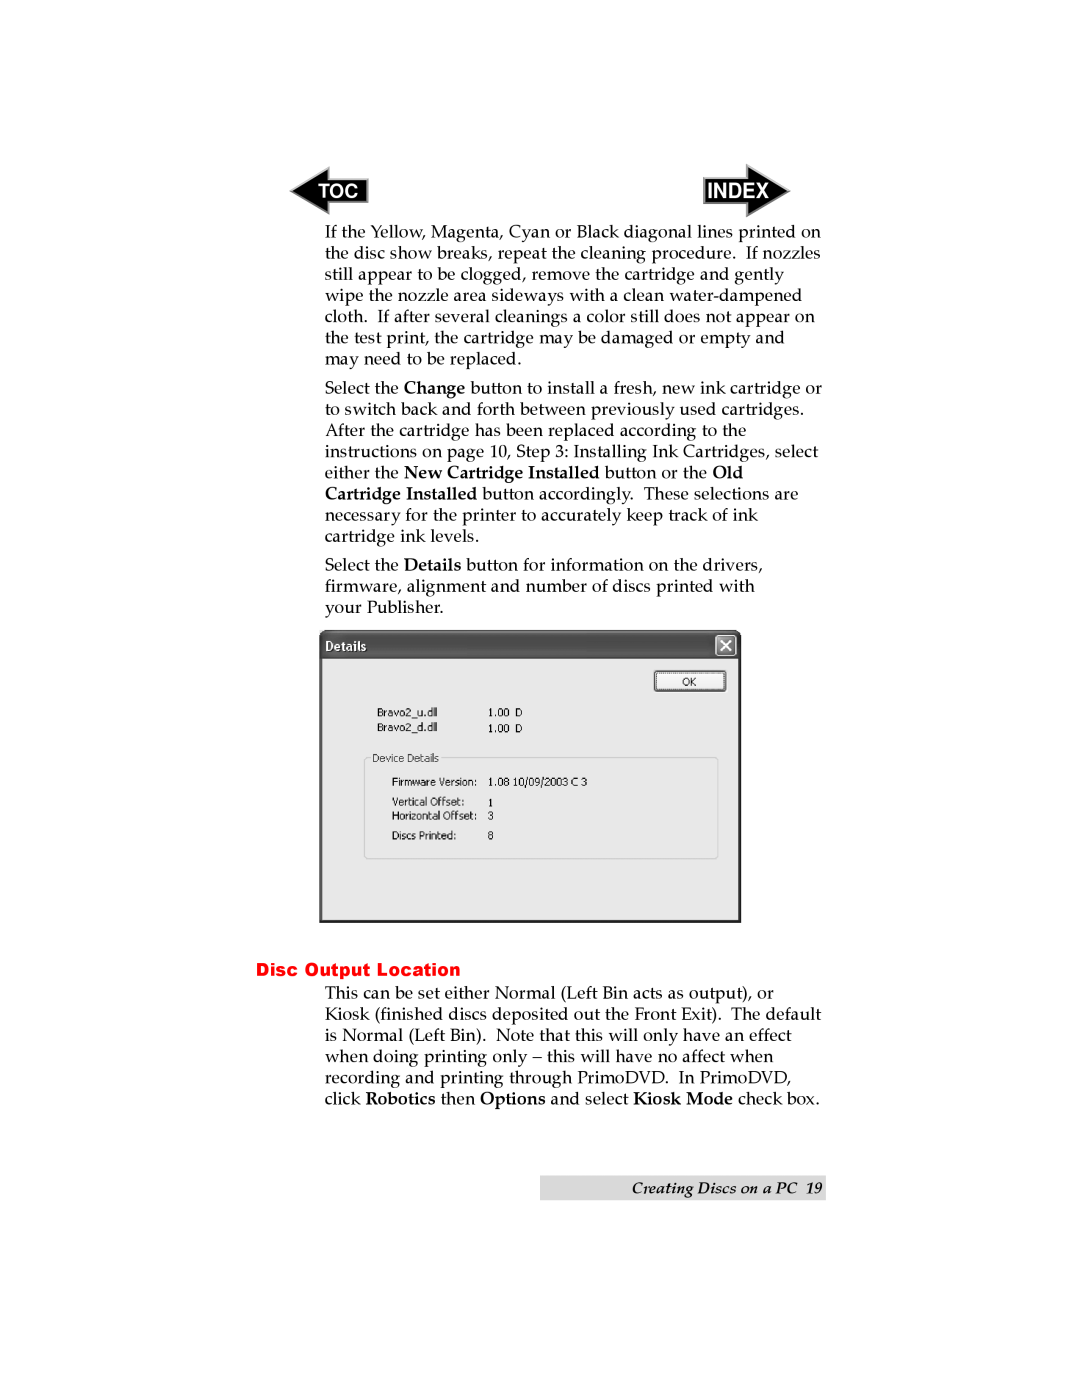 Primera Technology II user manual Index, Disc Output Location 